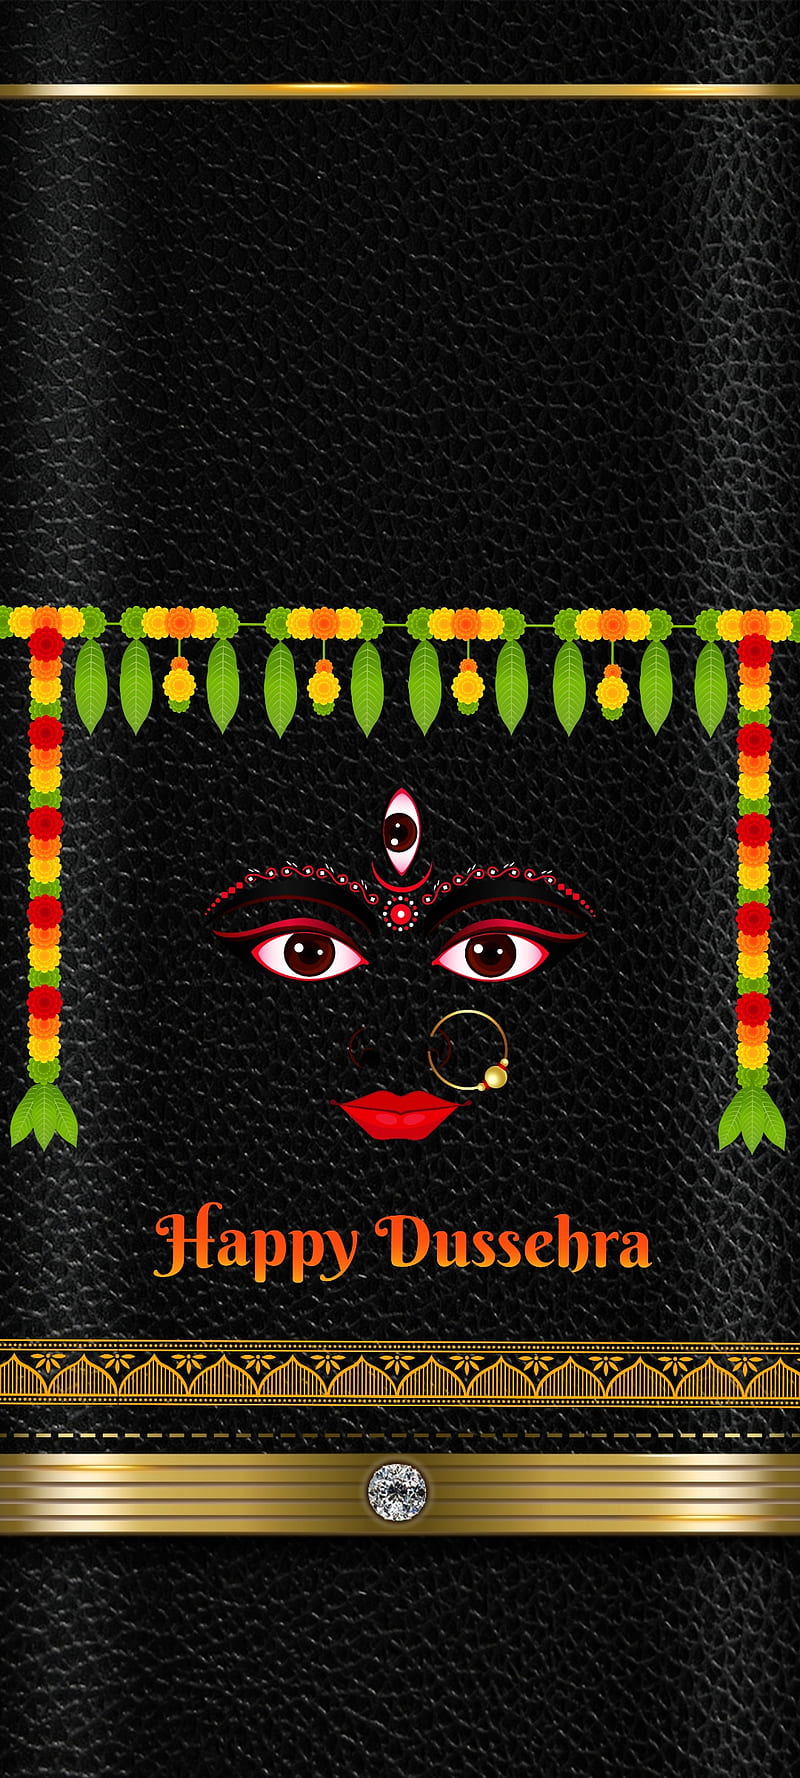 100+ Dussehra 2021 : Wishes GIFs Images SMS Status Messages Wallpaper - ANKK